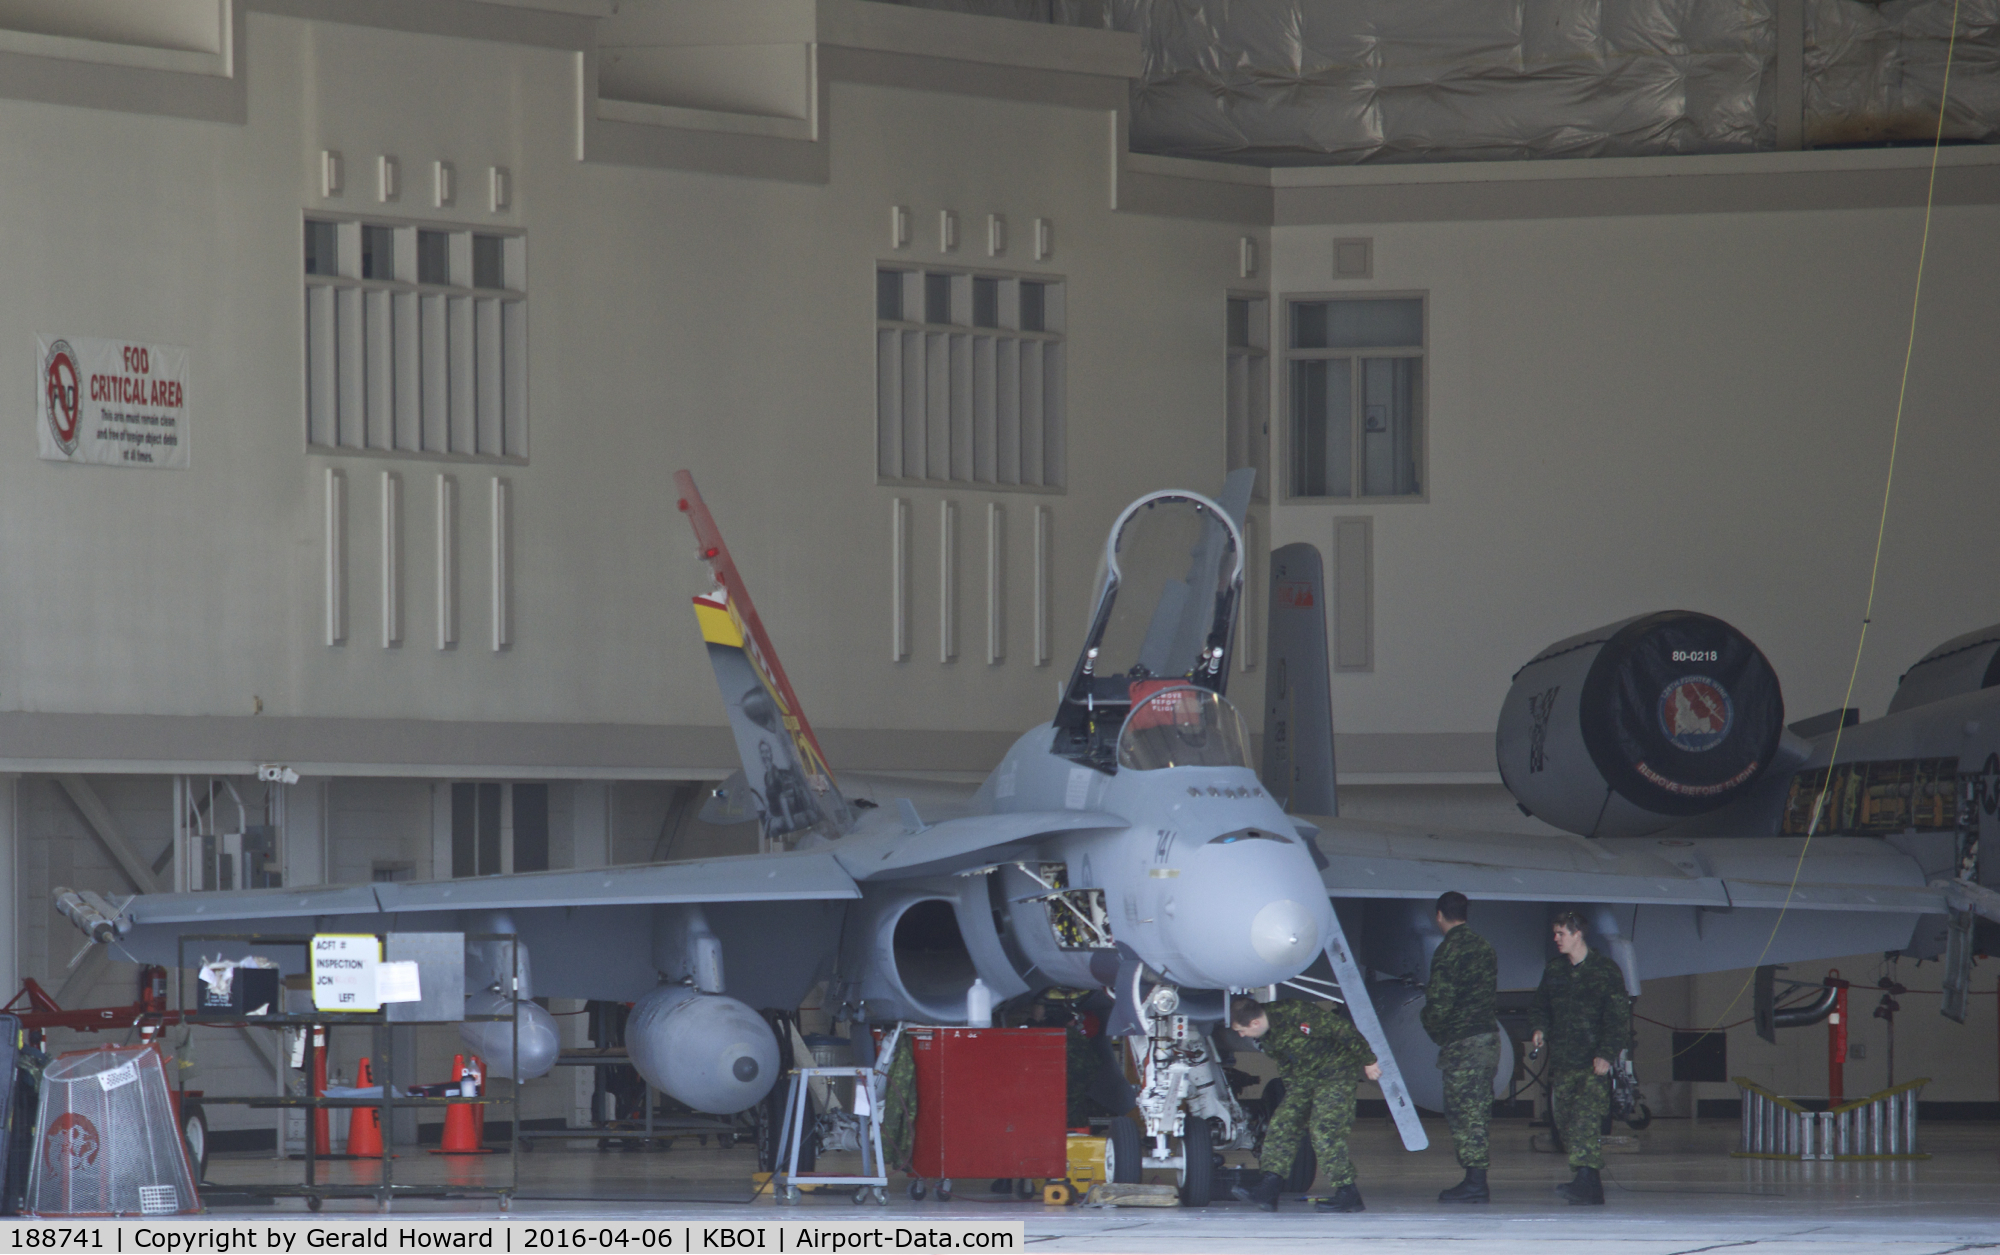 188741, McDonnell Douglas CF-188A Hornet C/N 0296/A241, Was on the Western Air ramp for a week before being moved into an Idaho ANG hangar to be worked on.